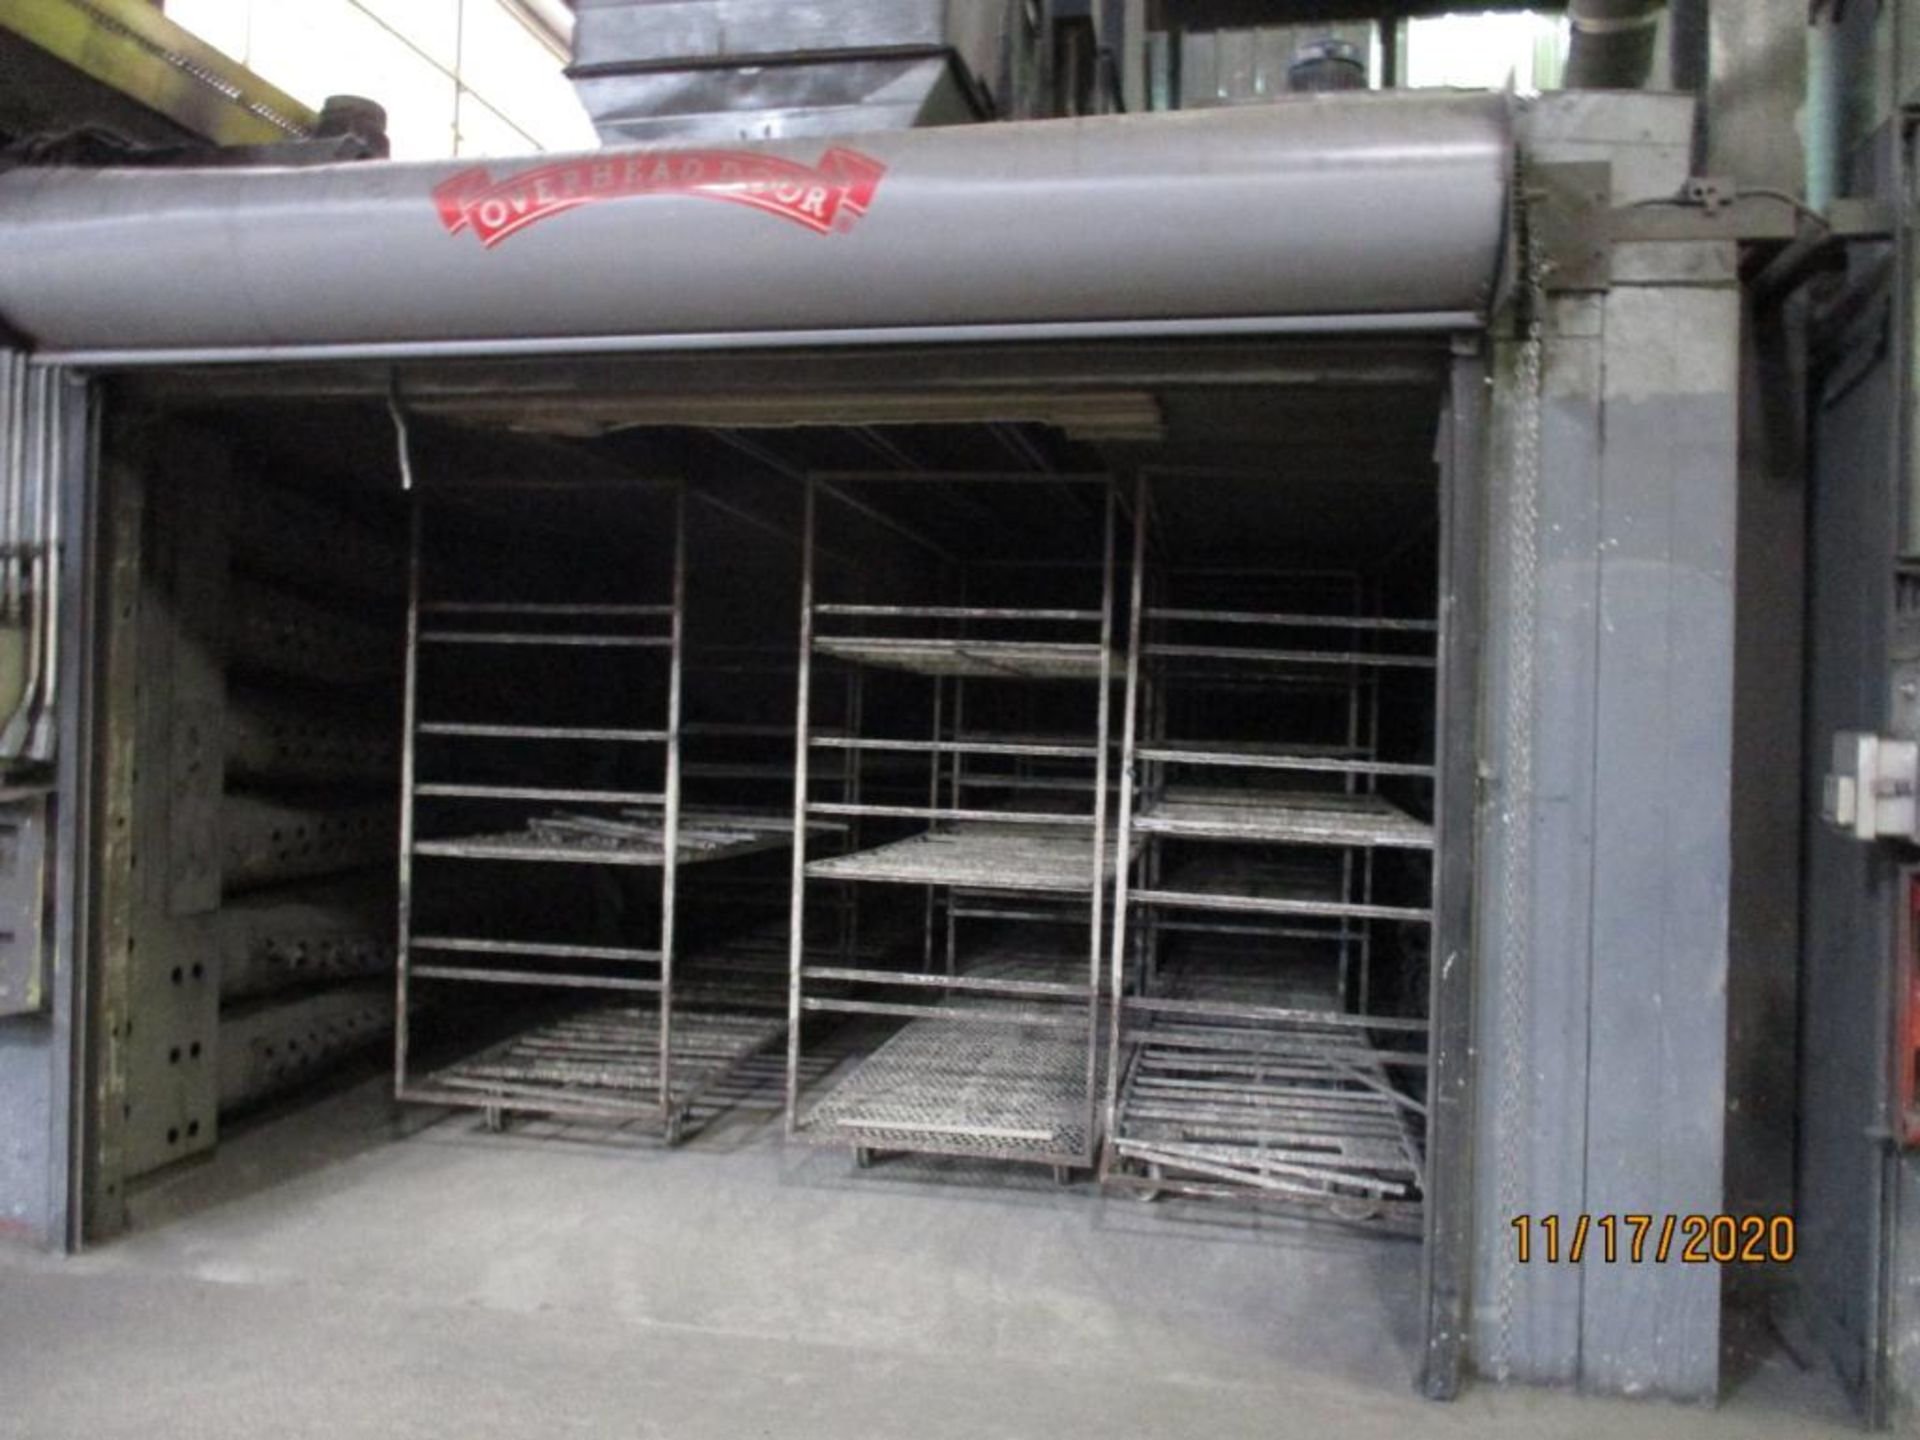 Vulcan Gas Fired Drying Oven, with Roll-up Door (LOCATED IN COLUMBIANA, AL) - Image 2 of 2